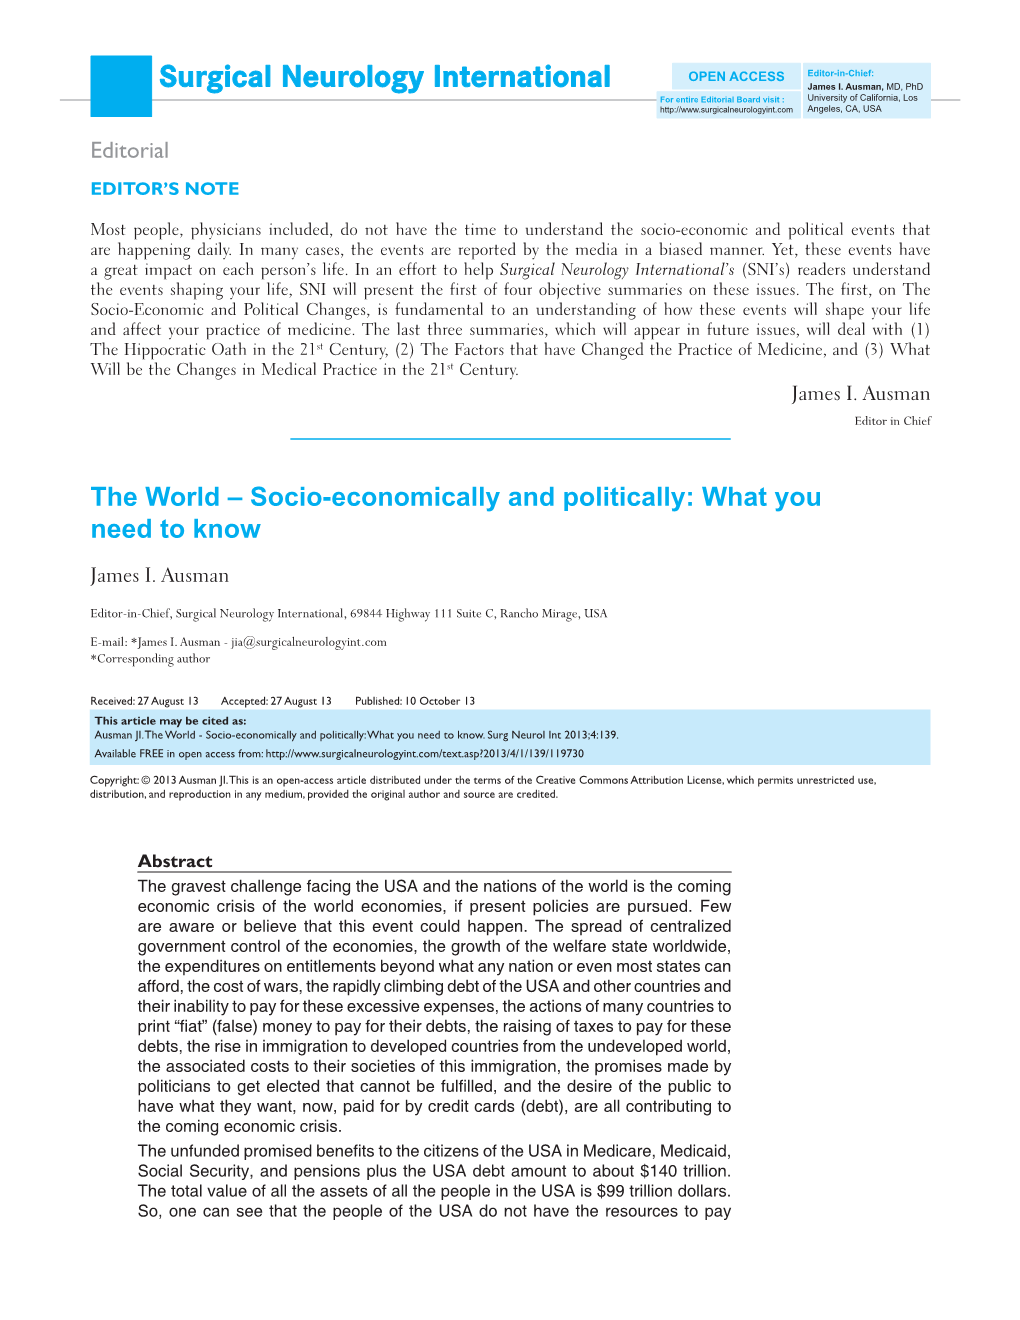 The World–Socio‑Economically and Politically: What You Need to Know